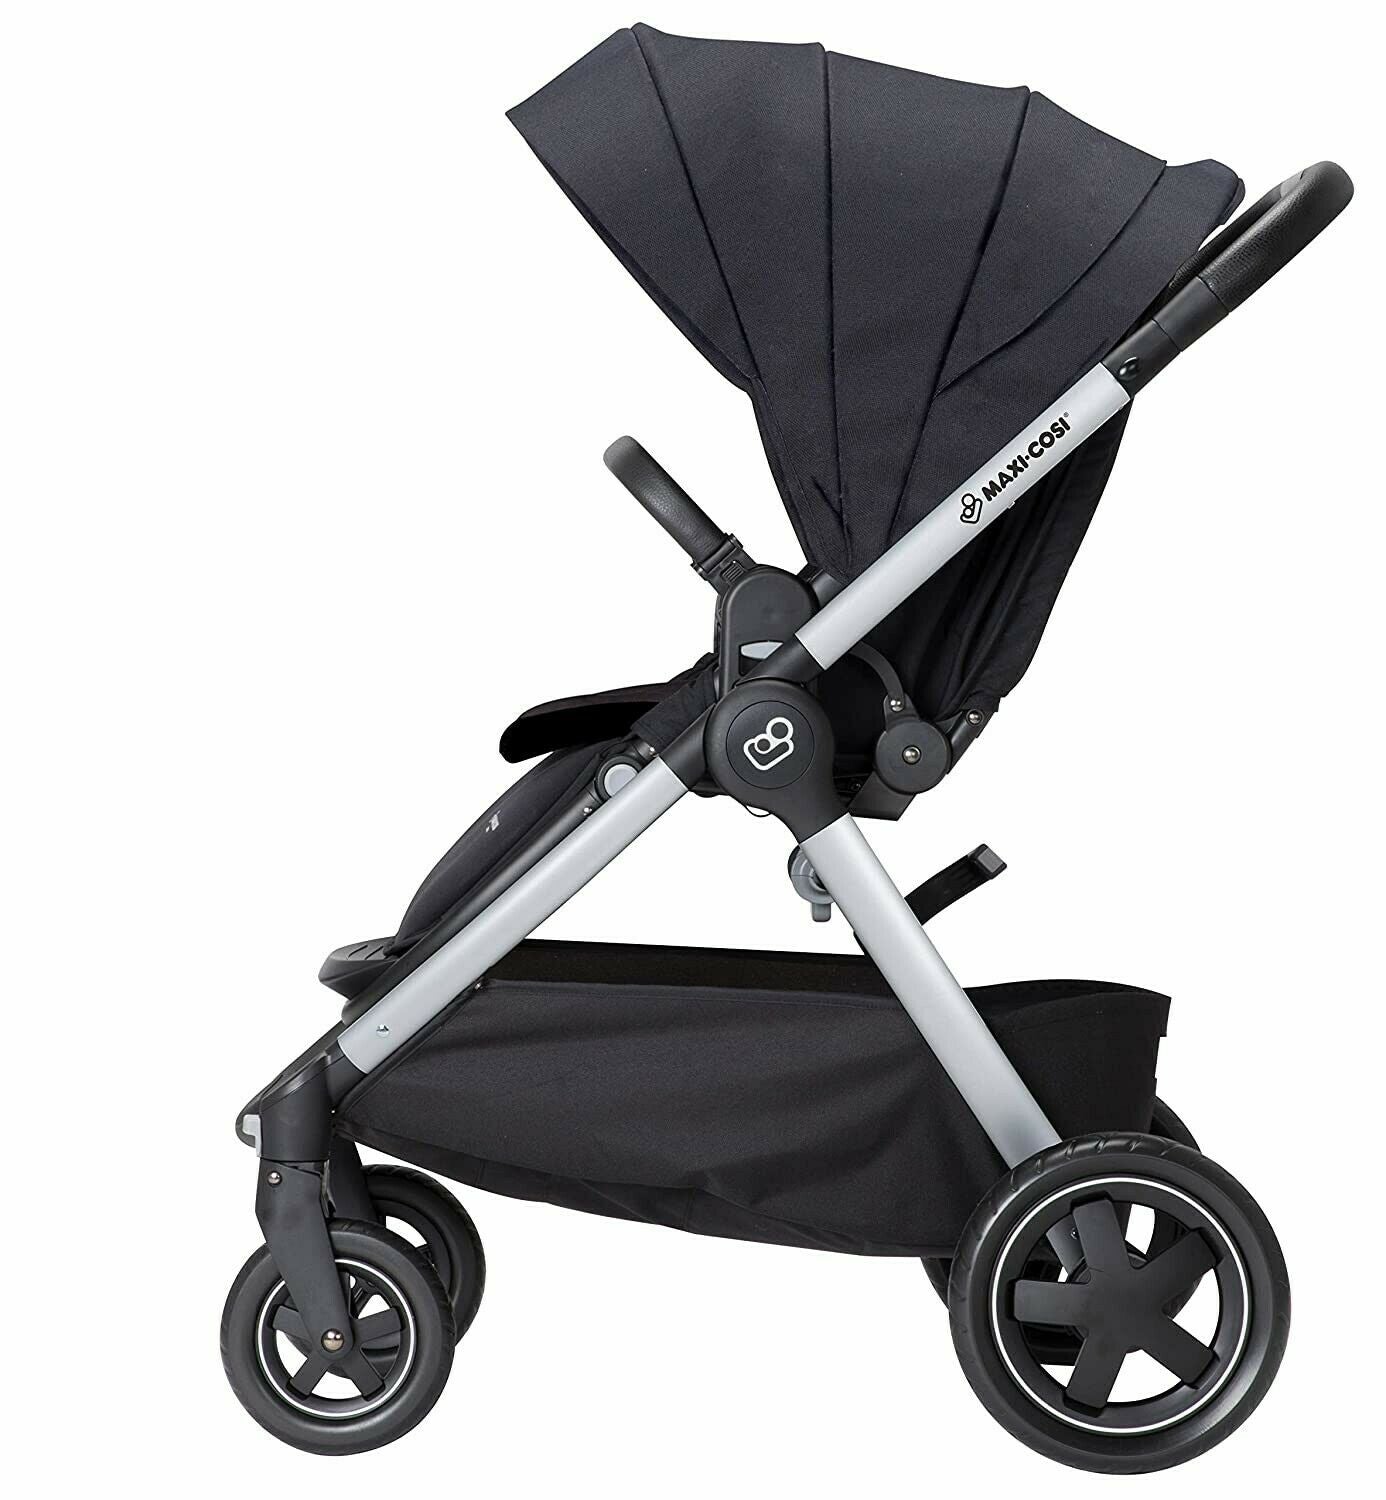 Maxi-Cosi Adorra Baby Stroller with Mico Max Car Seat Travel System Combo Black